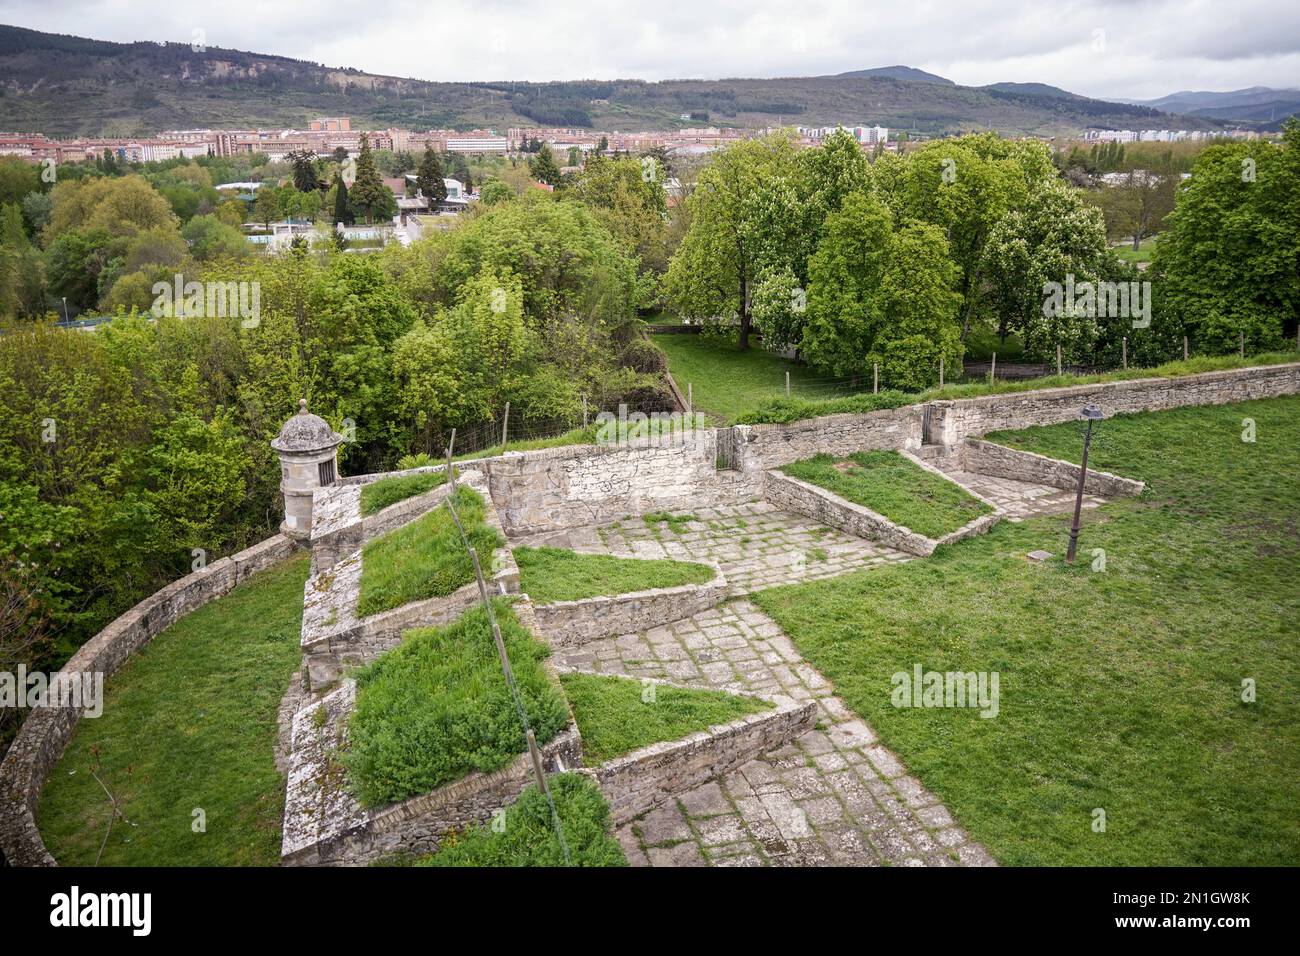 The walls and bulwarks of the grand fortified citadel, the star-shaped Ciudadela, Citadel of Pamplona, Pamplona, Navarre, Spain. Stock Photo